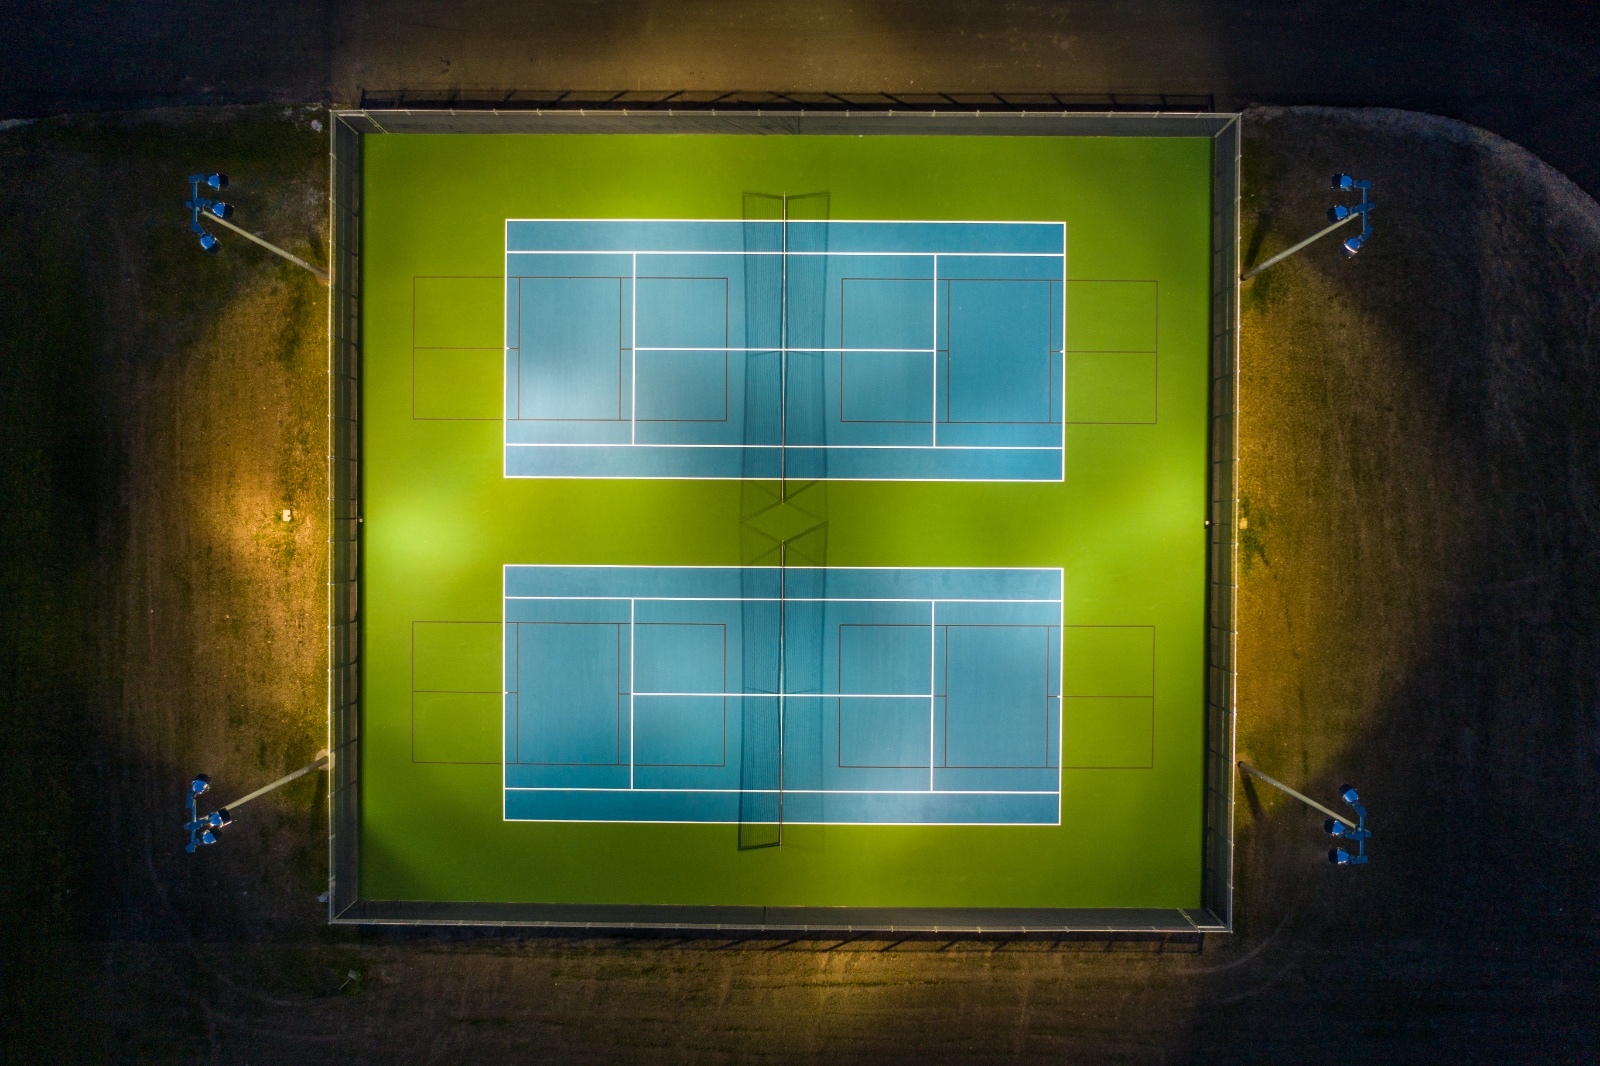 Tennis courts at night